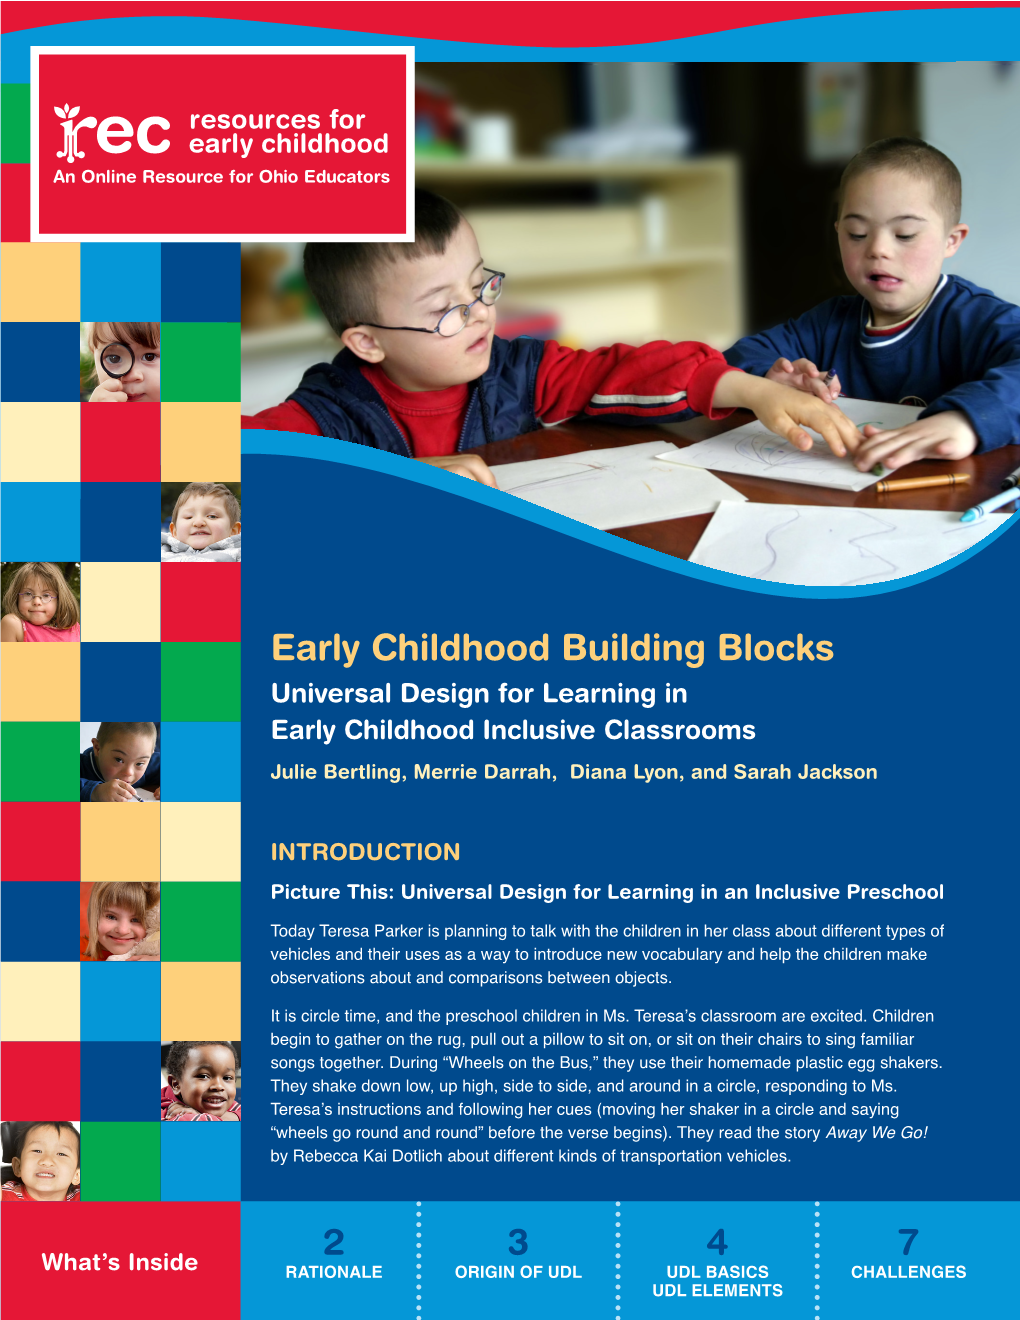 Early Childhood Building Blocks – Universal Design for Learning